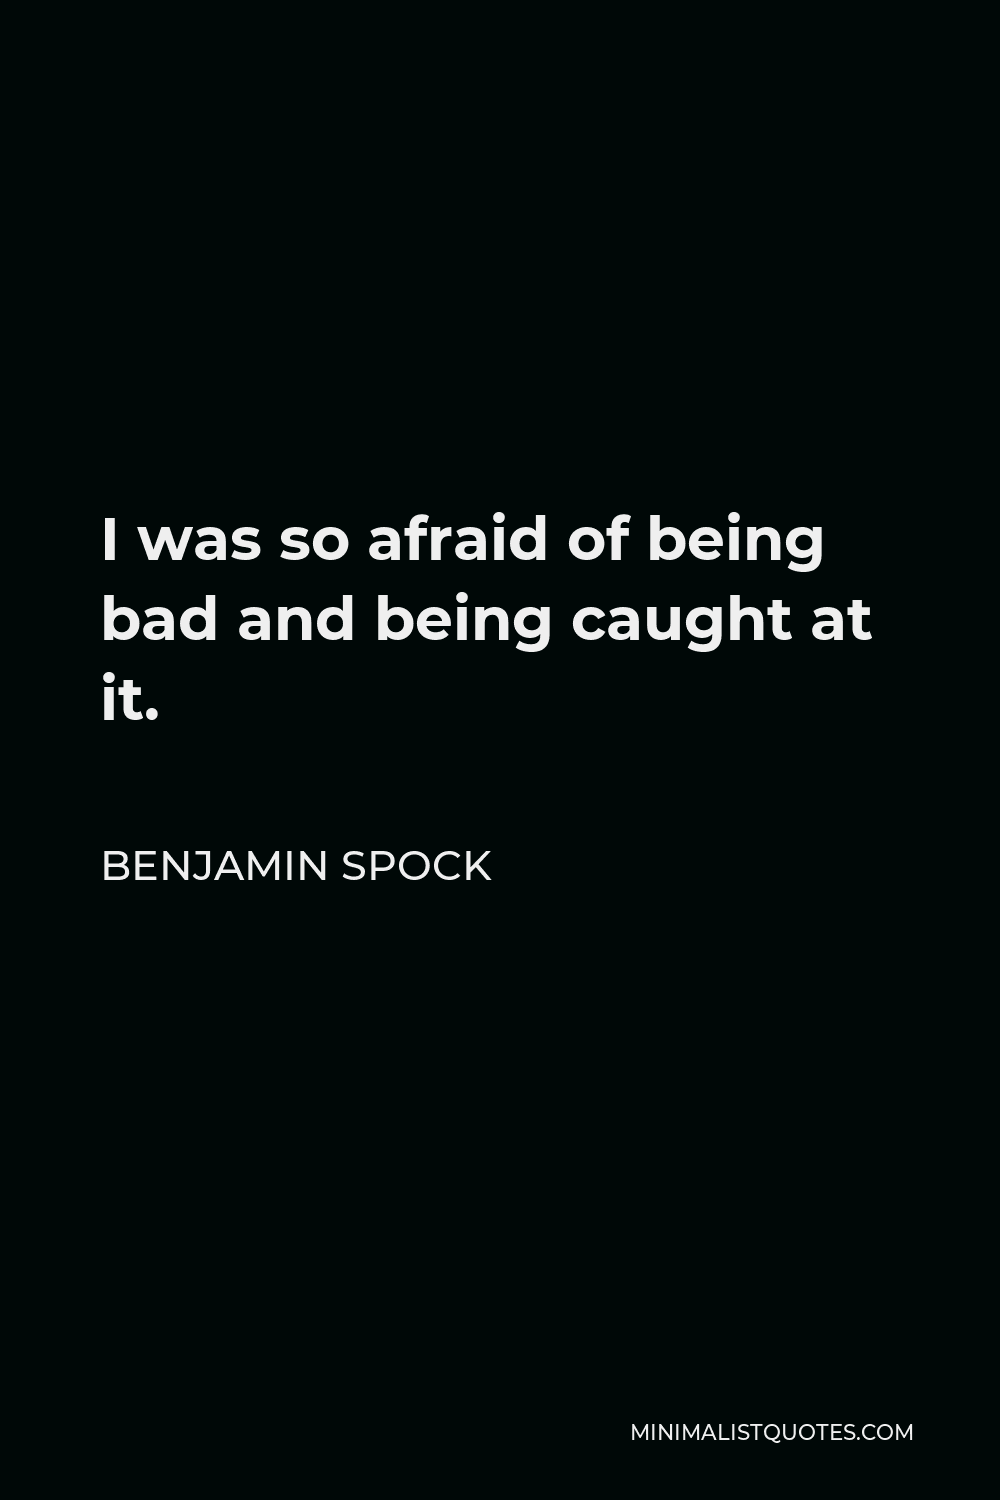 Benjamin Spock Quote - I was so afraid of being bad and being caught at it.